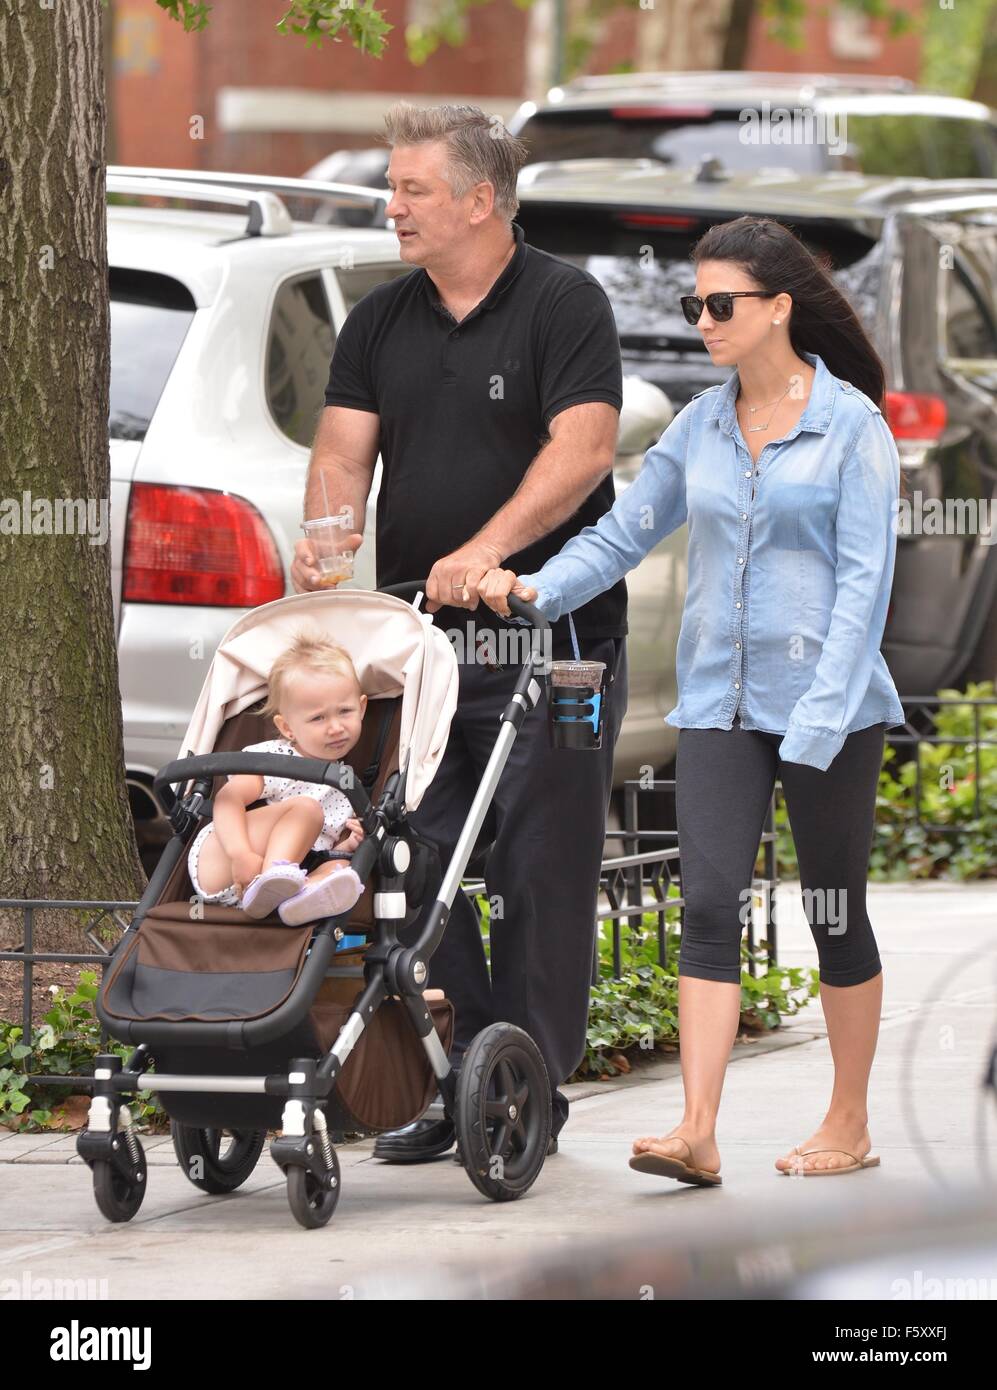 Alec Baldwin and wife Hilaria Baldwin take their daughter, Carmen, out for a stroll in SoHo  Featuring: Alec Baldwin, Hilaria Baldwin, Carmen Gabriela Baldwin Where: New York City, New York, United States When: 20 Sep 2015 Stock Photo